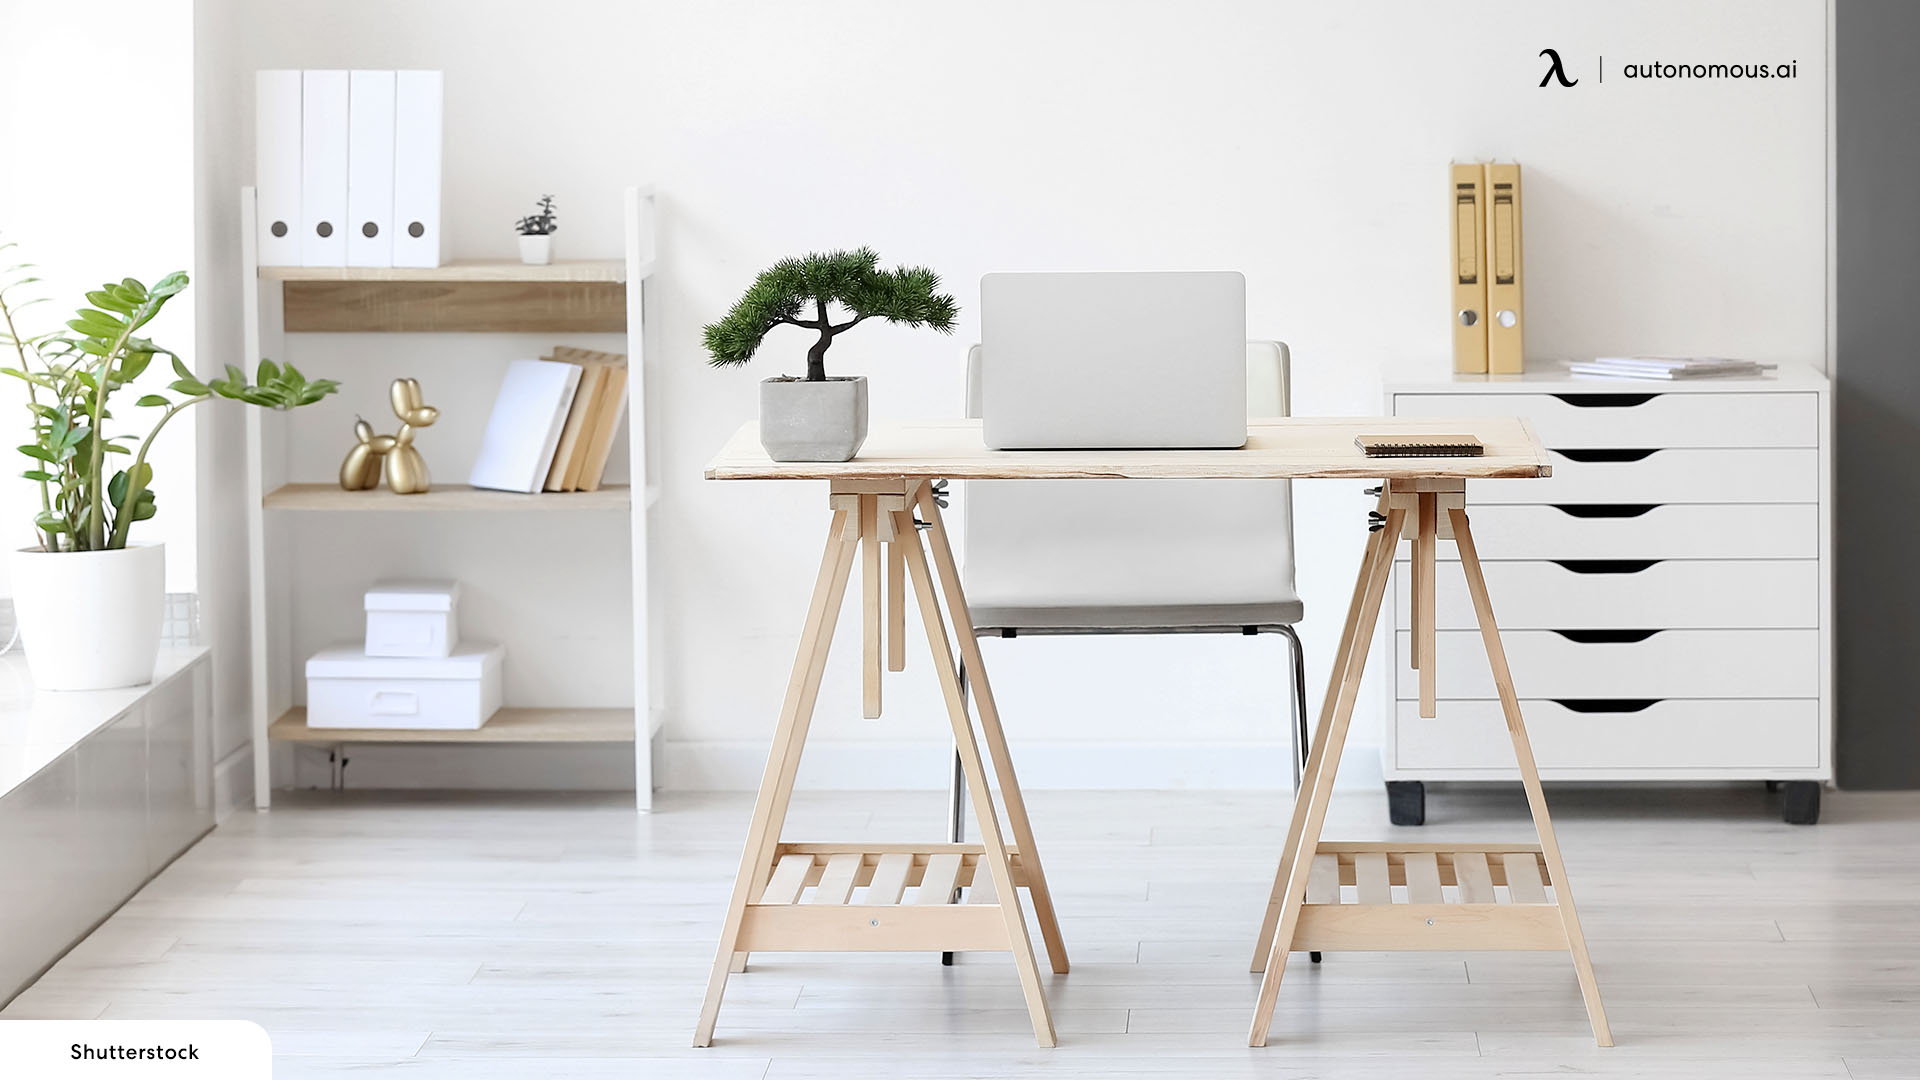 Get a Movable Workspace